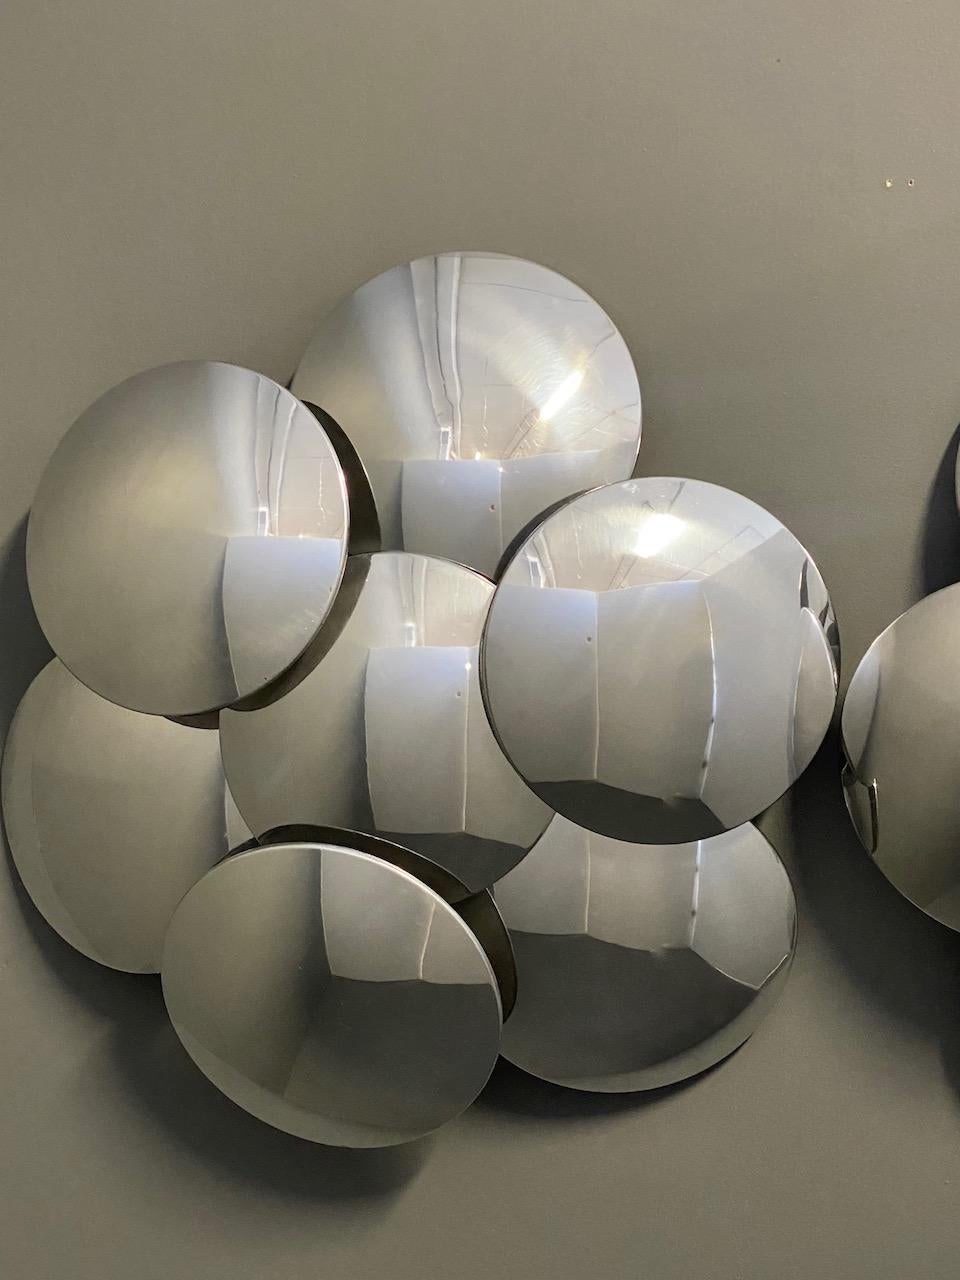 Italian Rare Pair Big Reggiani Seven Convex Disc Wall Sconce, 1970s, Italy, Whit Label For Sale